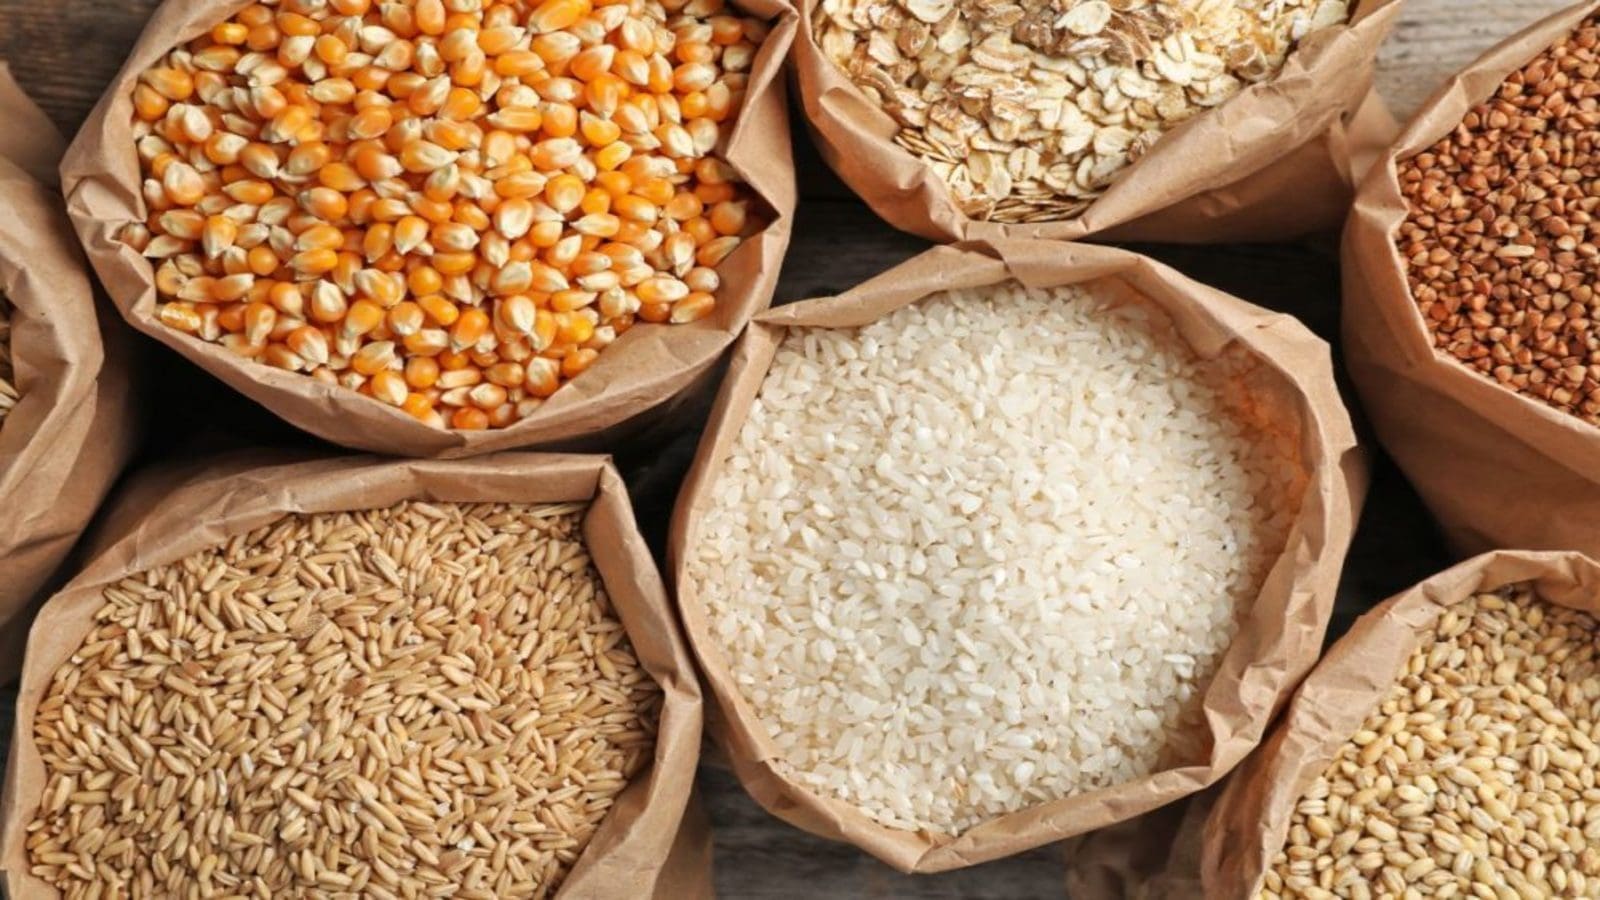 Burkina Faso launches US$41M project to ramp up grain production